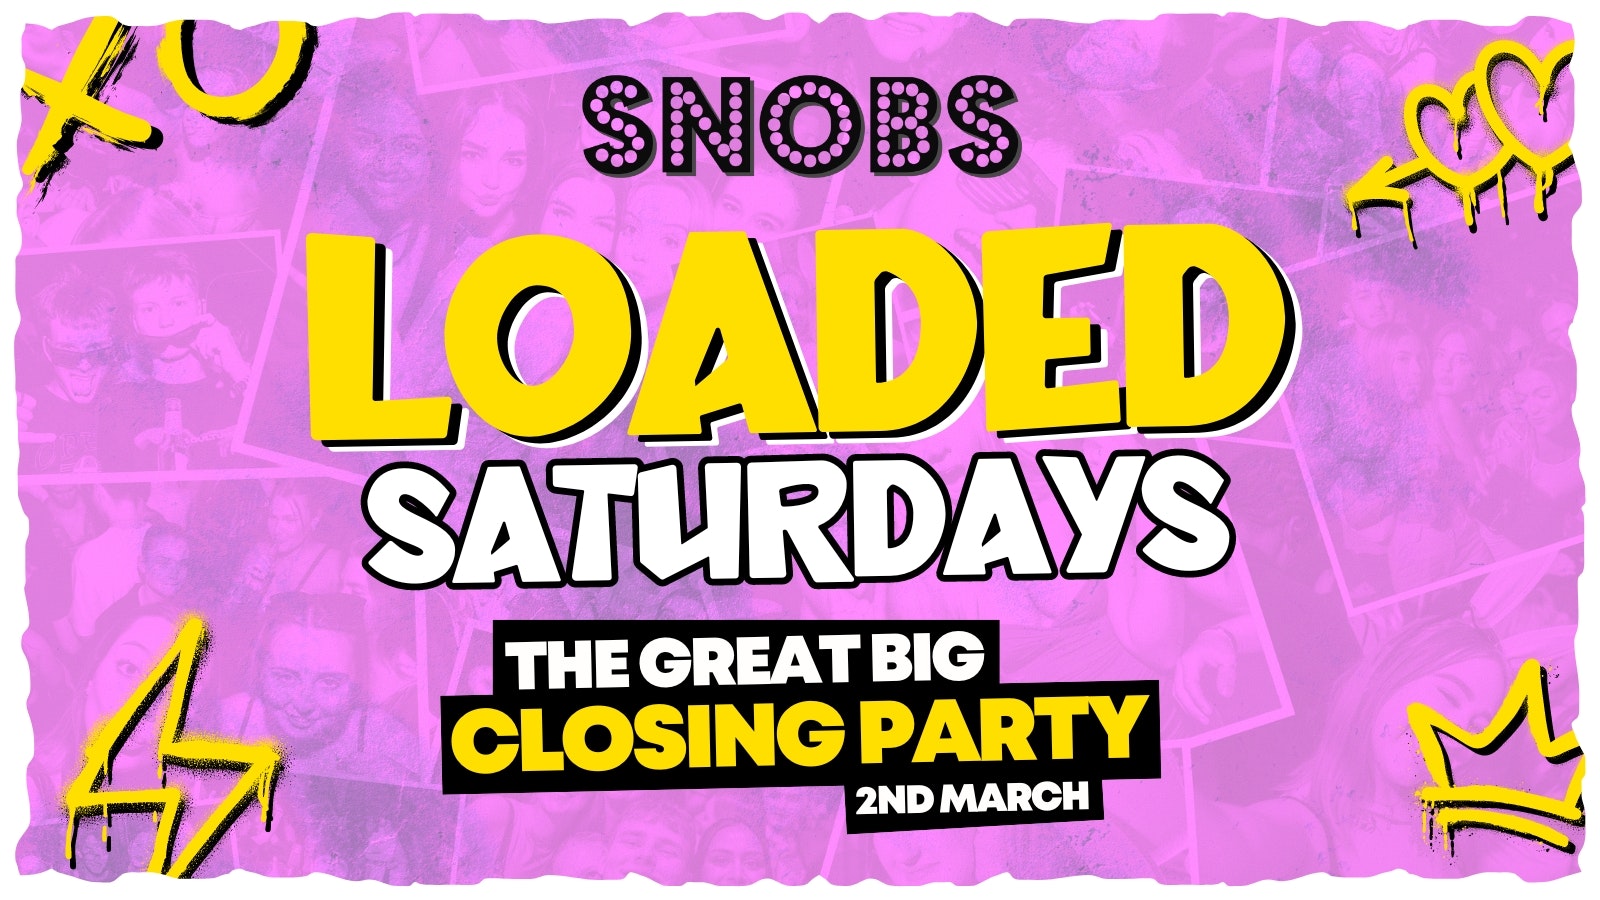 Loaded Saturday🔥 SINGLE EVENT TIX NOW ON SALE!!🔥🚨THE GREAT BIG CLOSING PARTY 🚨 2nd March